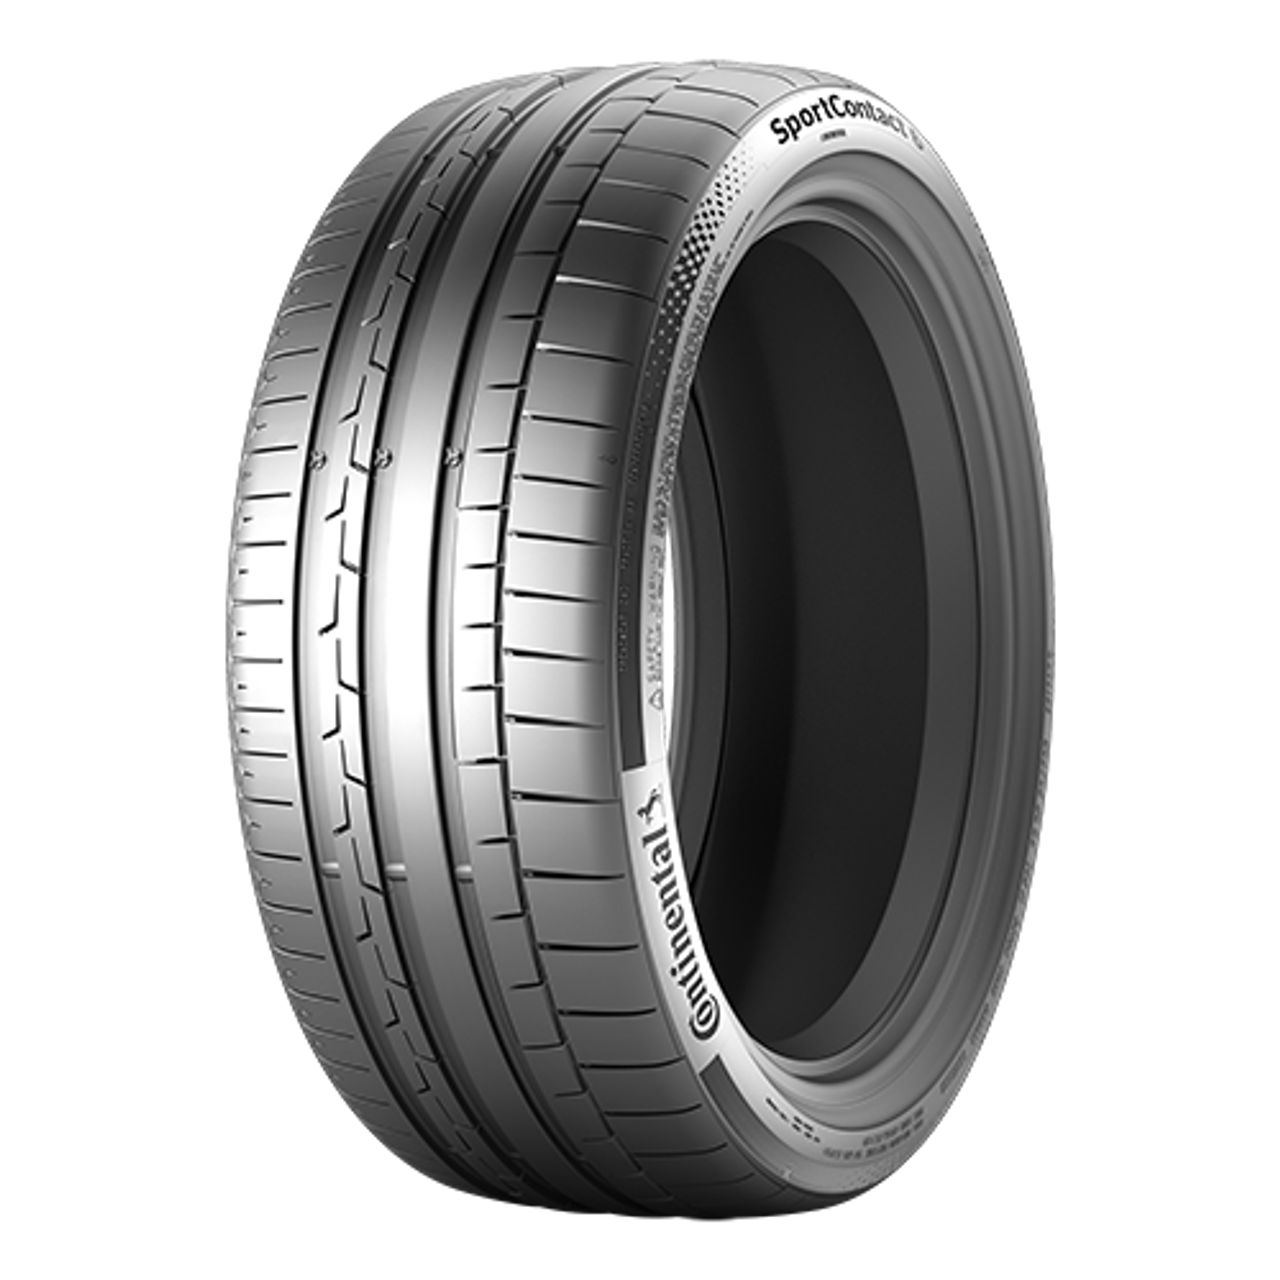 CONTINENTAL SPORTCONTACT 6 (T0) (EVc) 285/35R22 106Y CONTISILENT